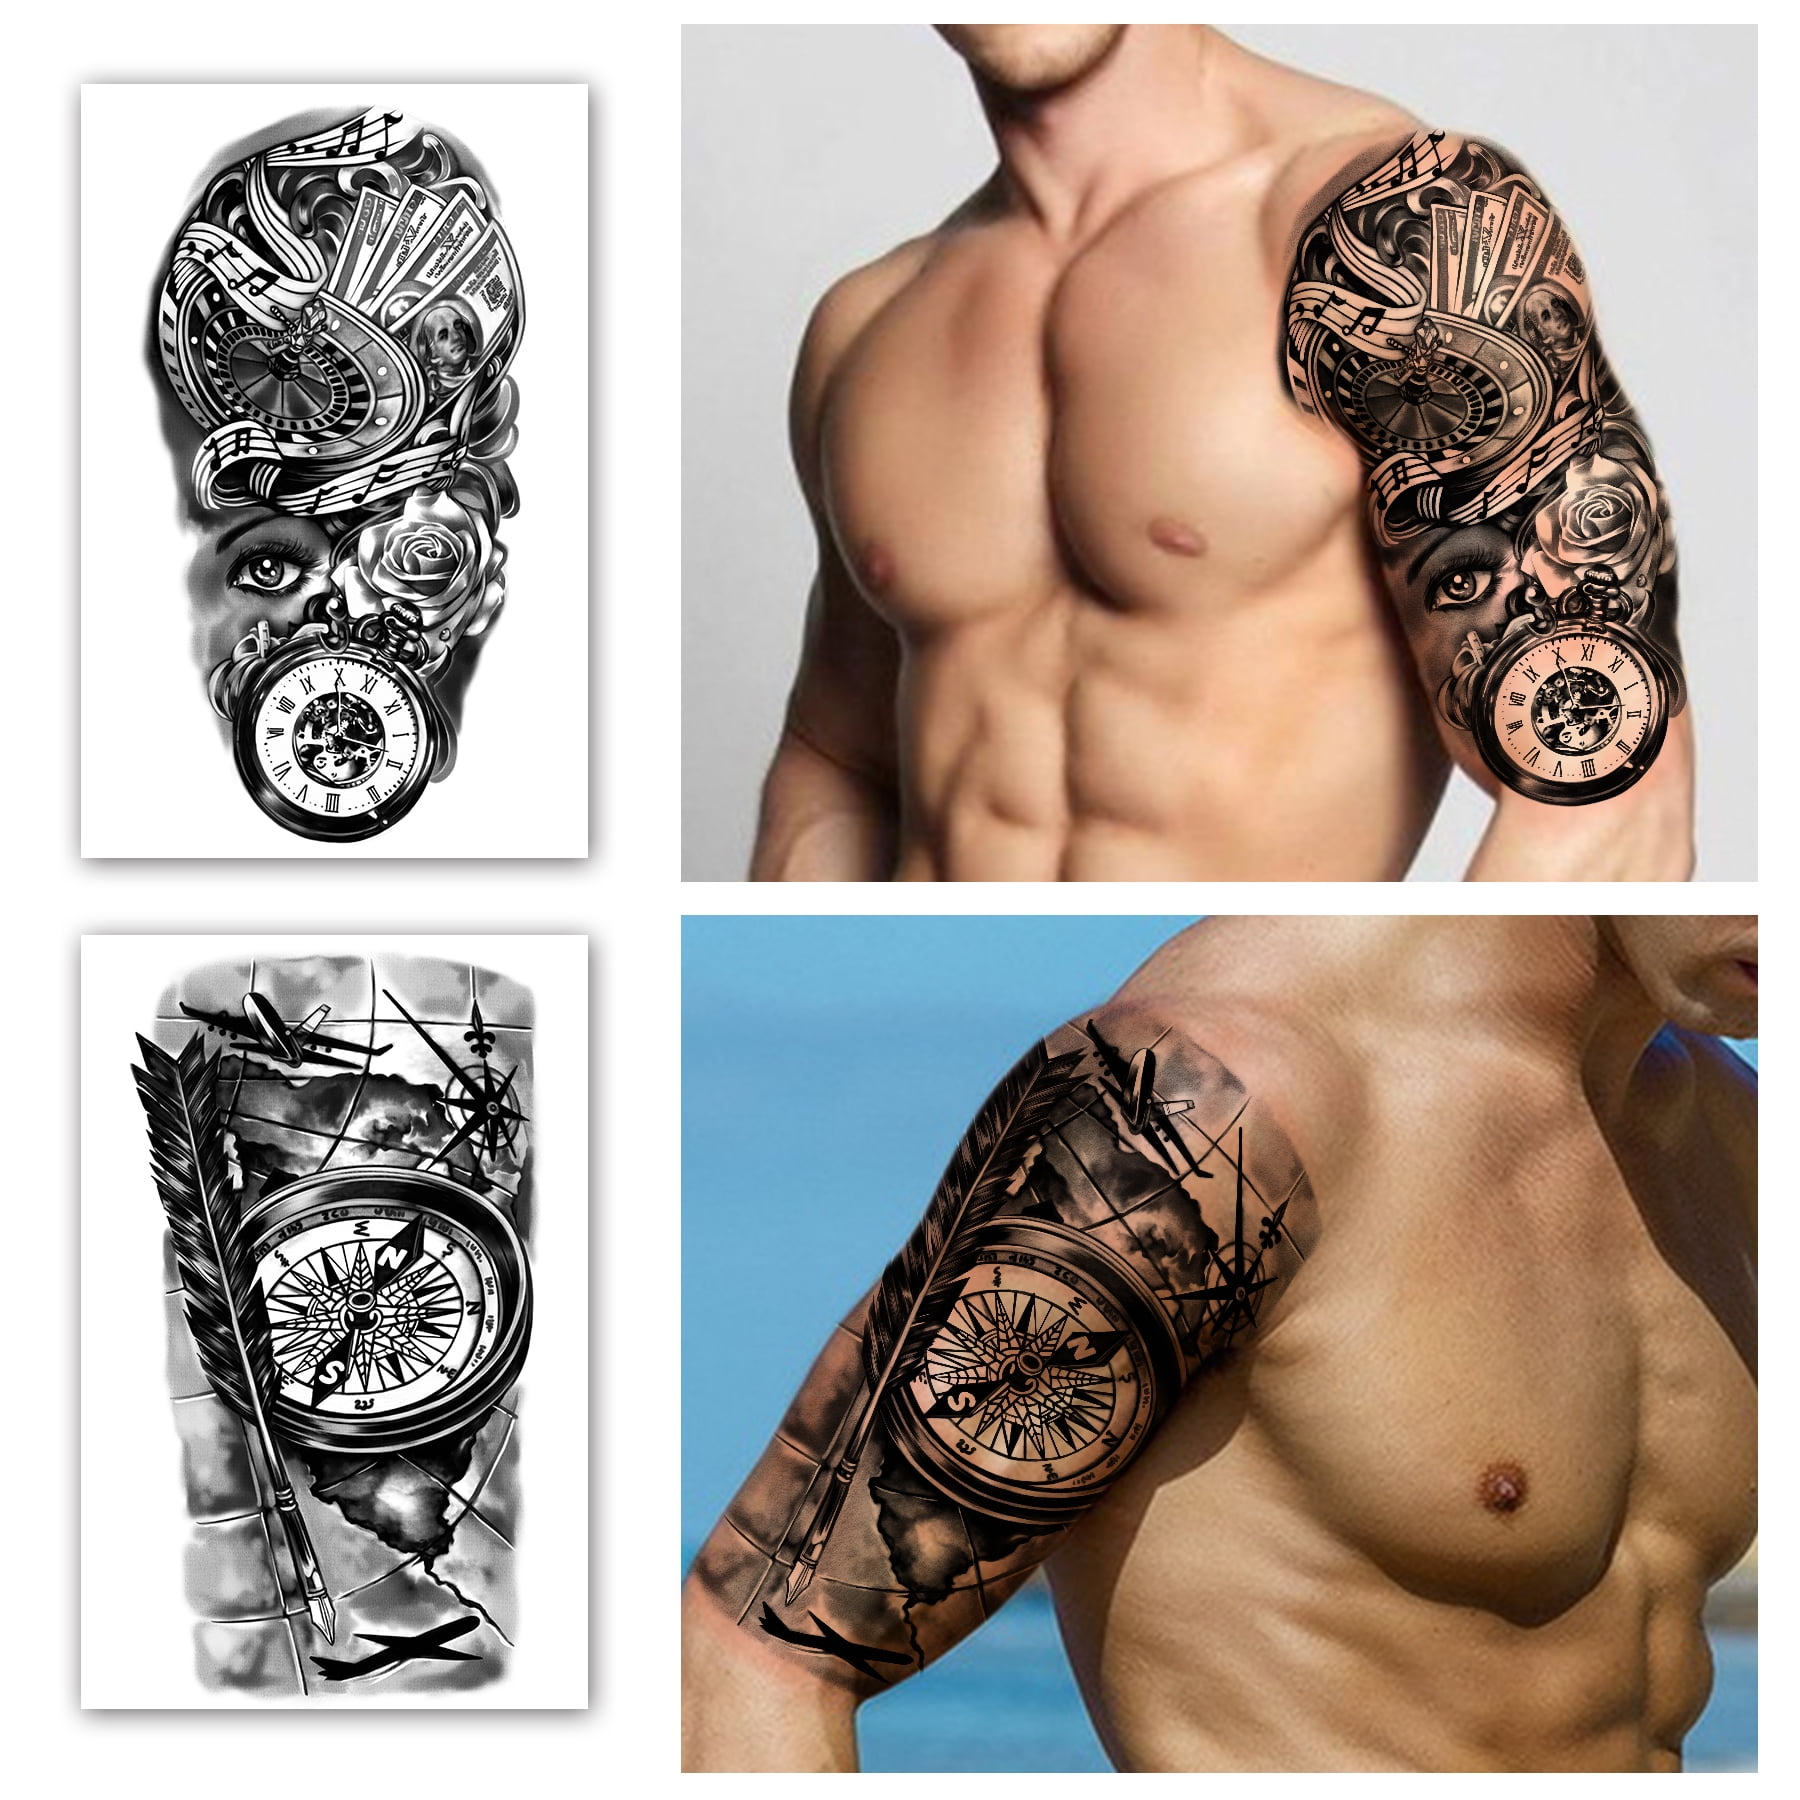 Waterproof Full Arm Temporary Tattoos 8 Sheets and Half Arm Shoulder Tattoo 8 Sheets, Extra Large LastingTattoo Stickers for Men and Women (22.83"X7.1") - Walmart.com